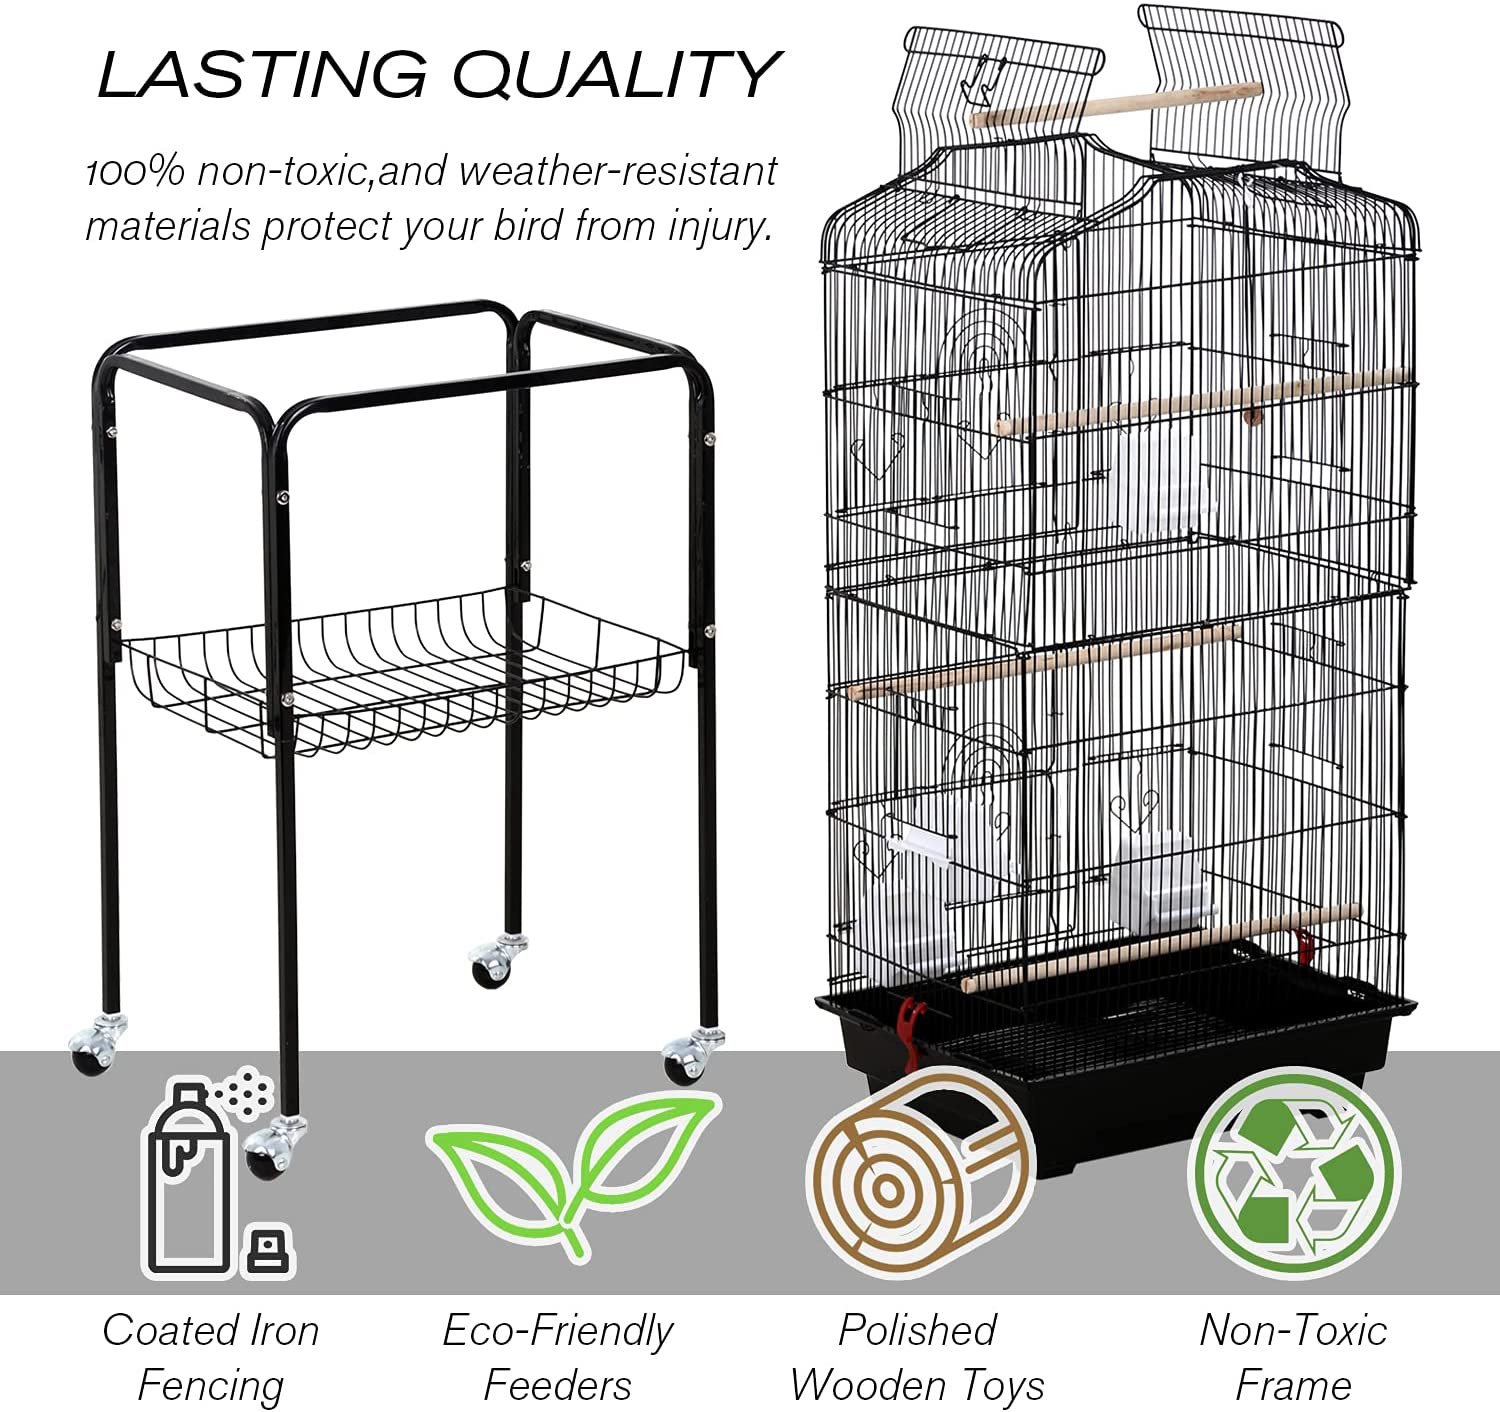 Bird Cage Parakeet Cage 64 Inch Open Top Standing Parrot Cage Accessories with Rolling Stand for Medium Small Cockatiel Canary Parakeet Conure Finches Budgie Lovebirds Pet Storage Shelf